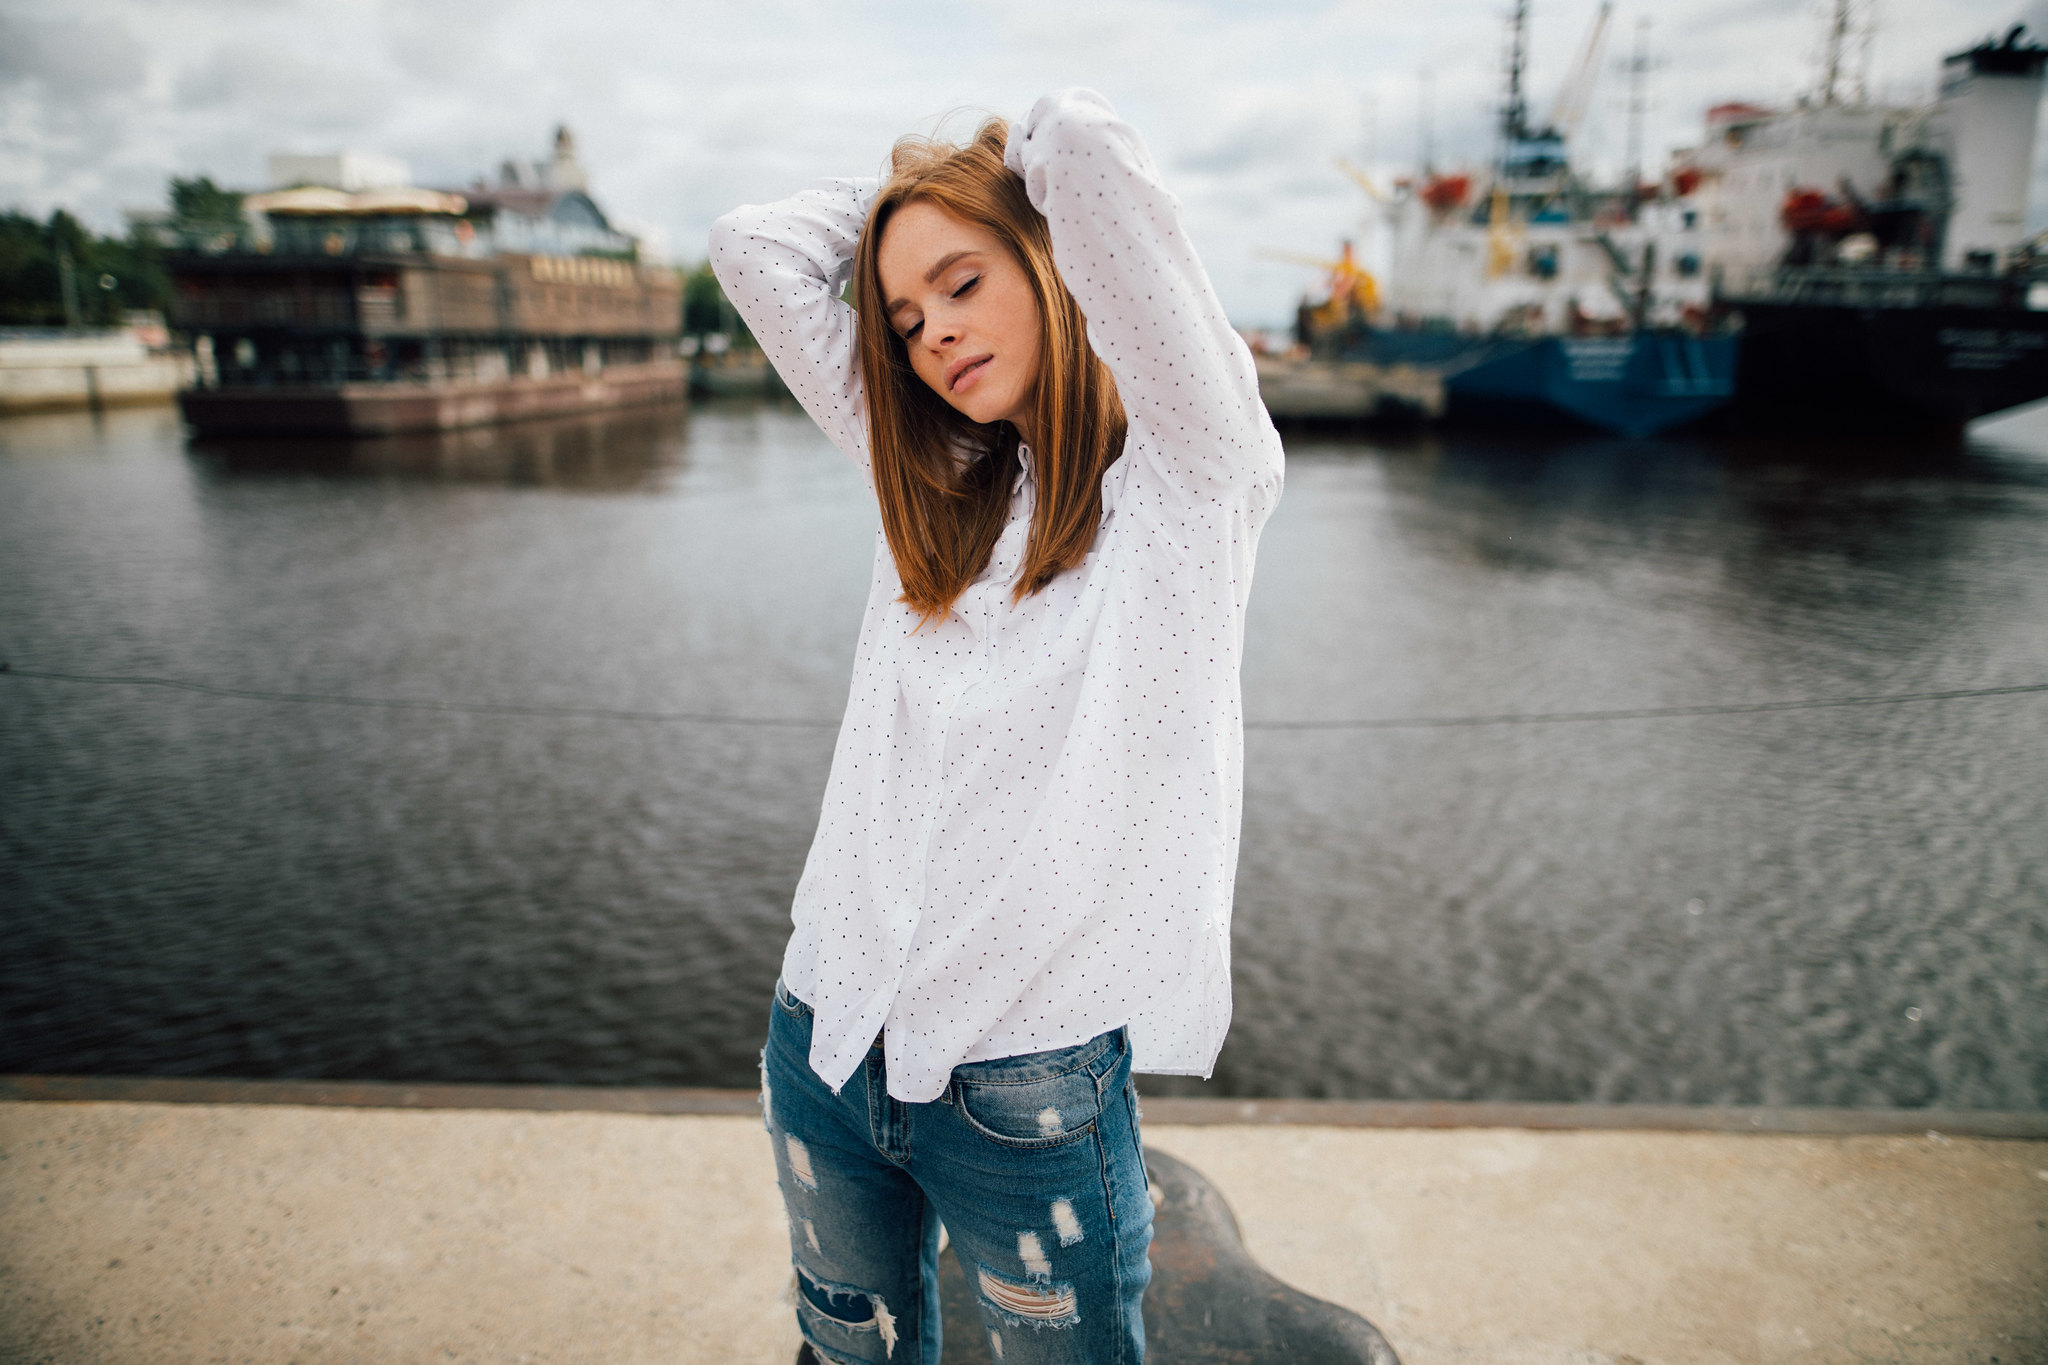 People 2048x1365 women model closed eyes open mouth arms up white shirt polka dots jeans denim pier ship depth of field redhead